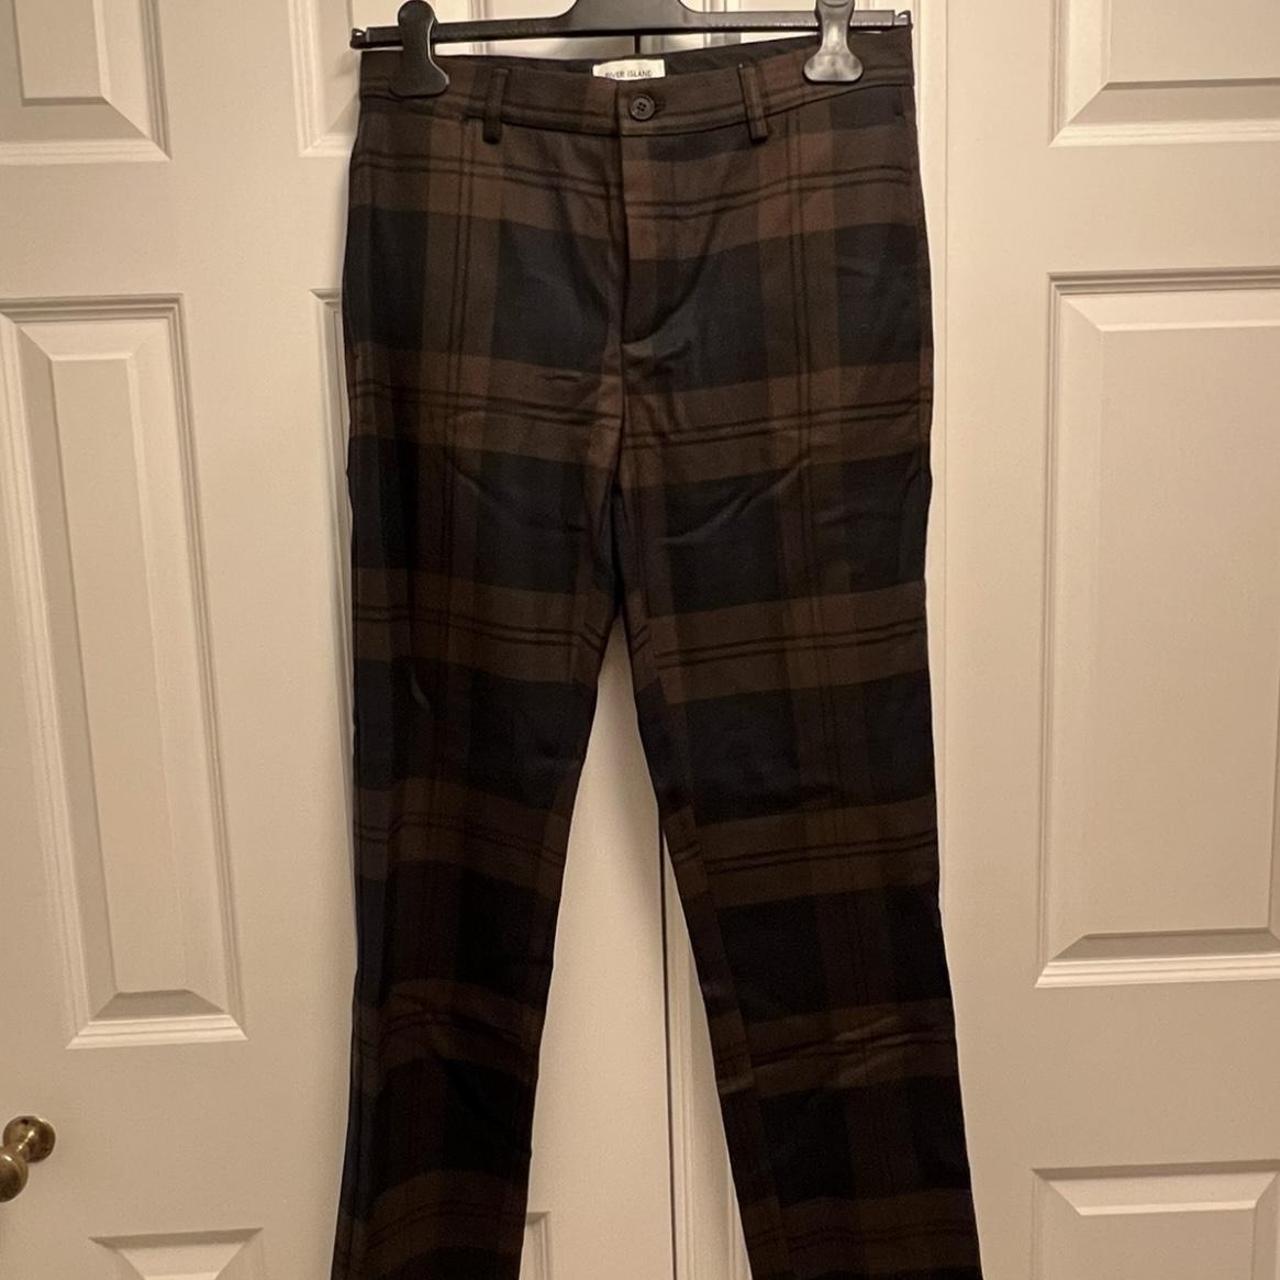 River Island Men's Brown and Black Trousers